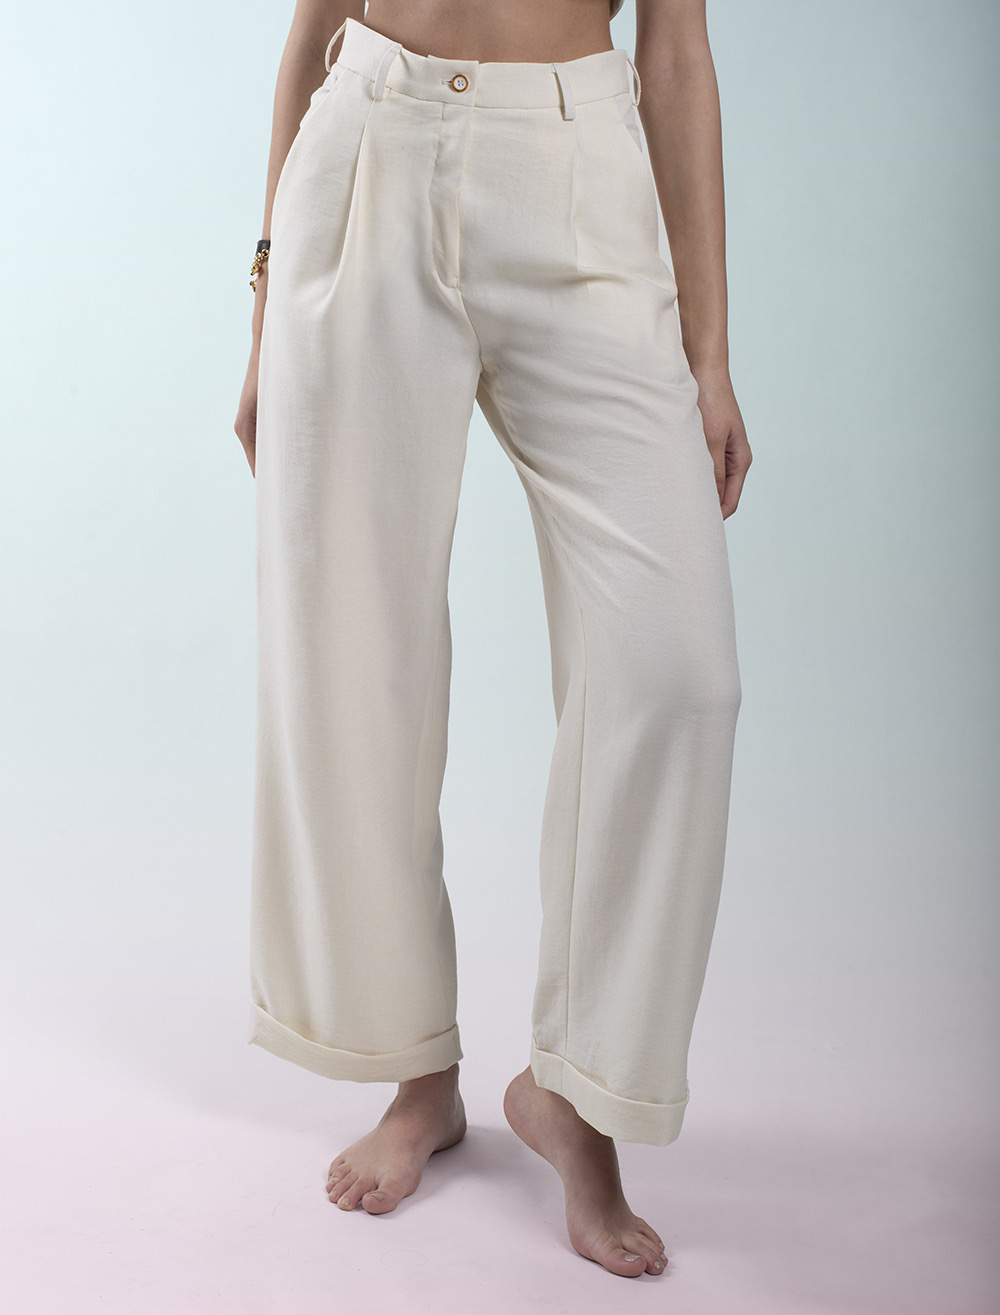 Massimo Dutti | Pants & Jumpsuits | New Darted Trousers With Side Buckles |  Poshmark